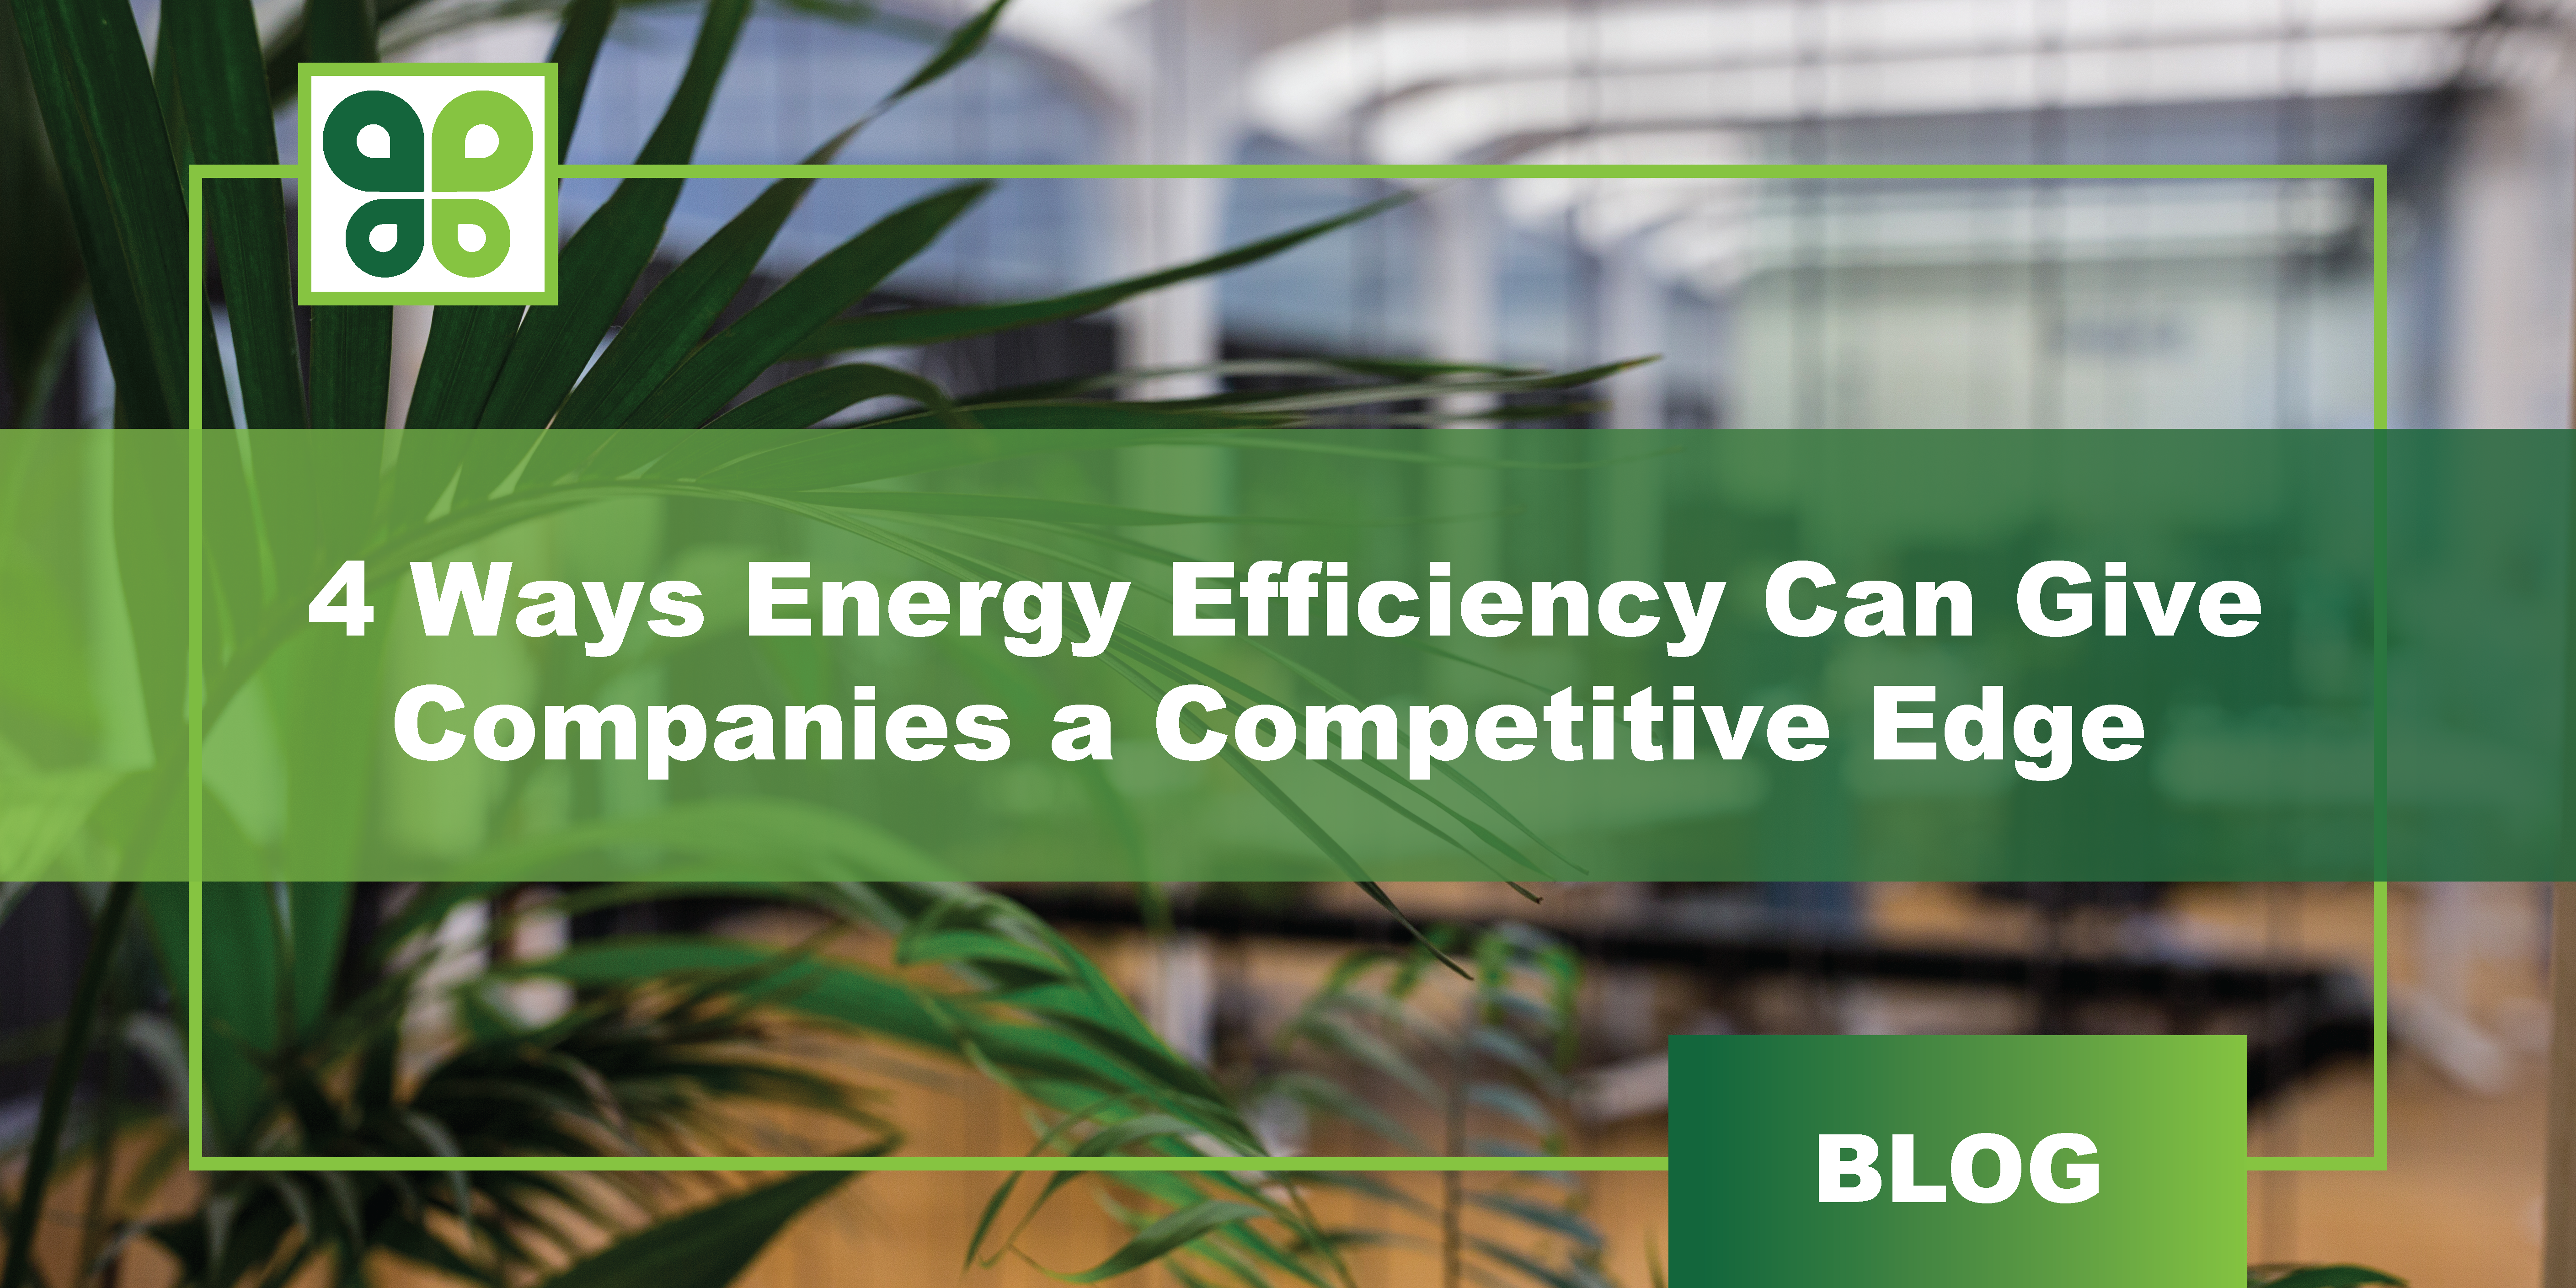 4 Ways Energy Efficiency Can Give Companies a Competitive Edge